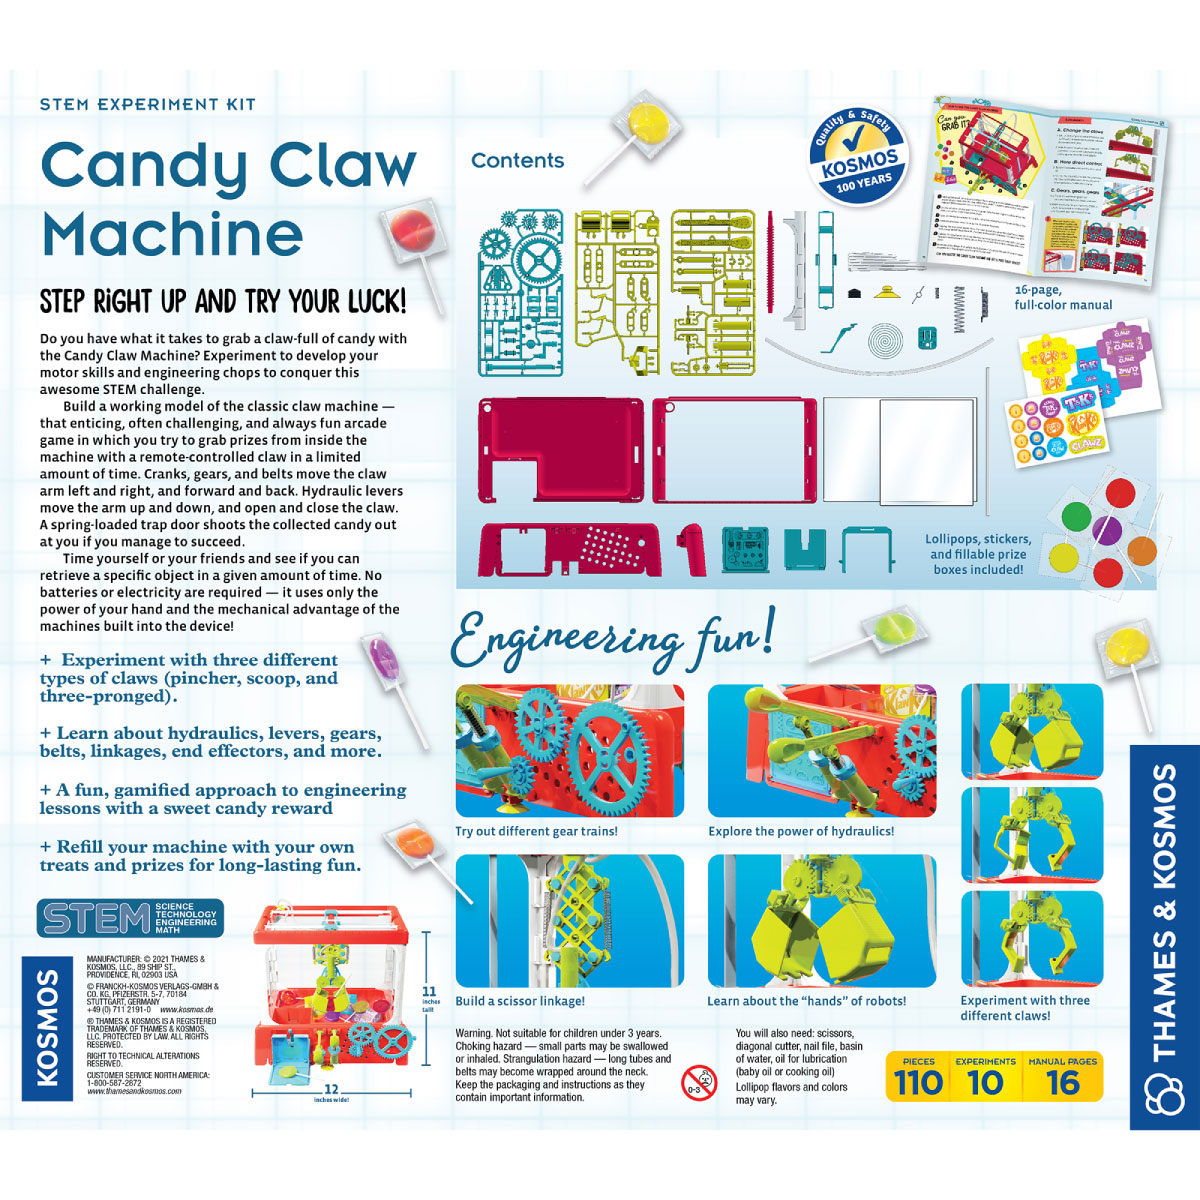 Candy Claw Machine from Thames & Kosmos